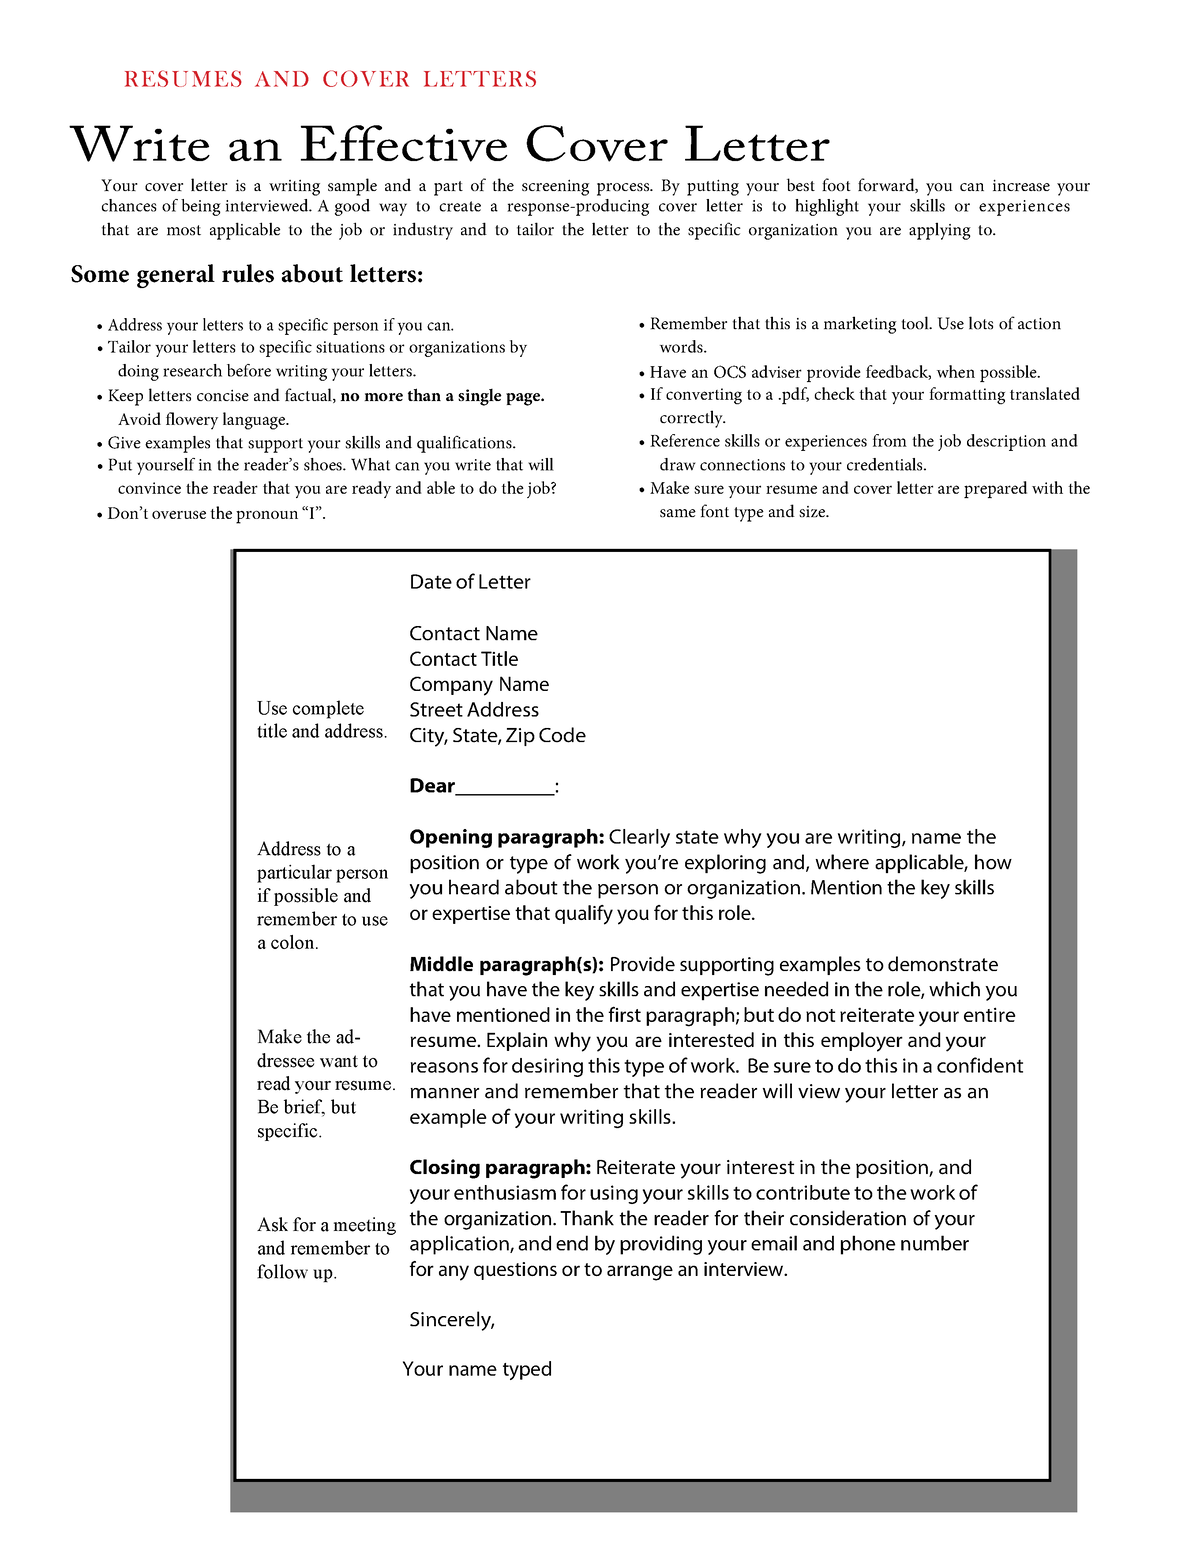 harvard cover letters and resumes